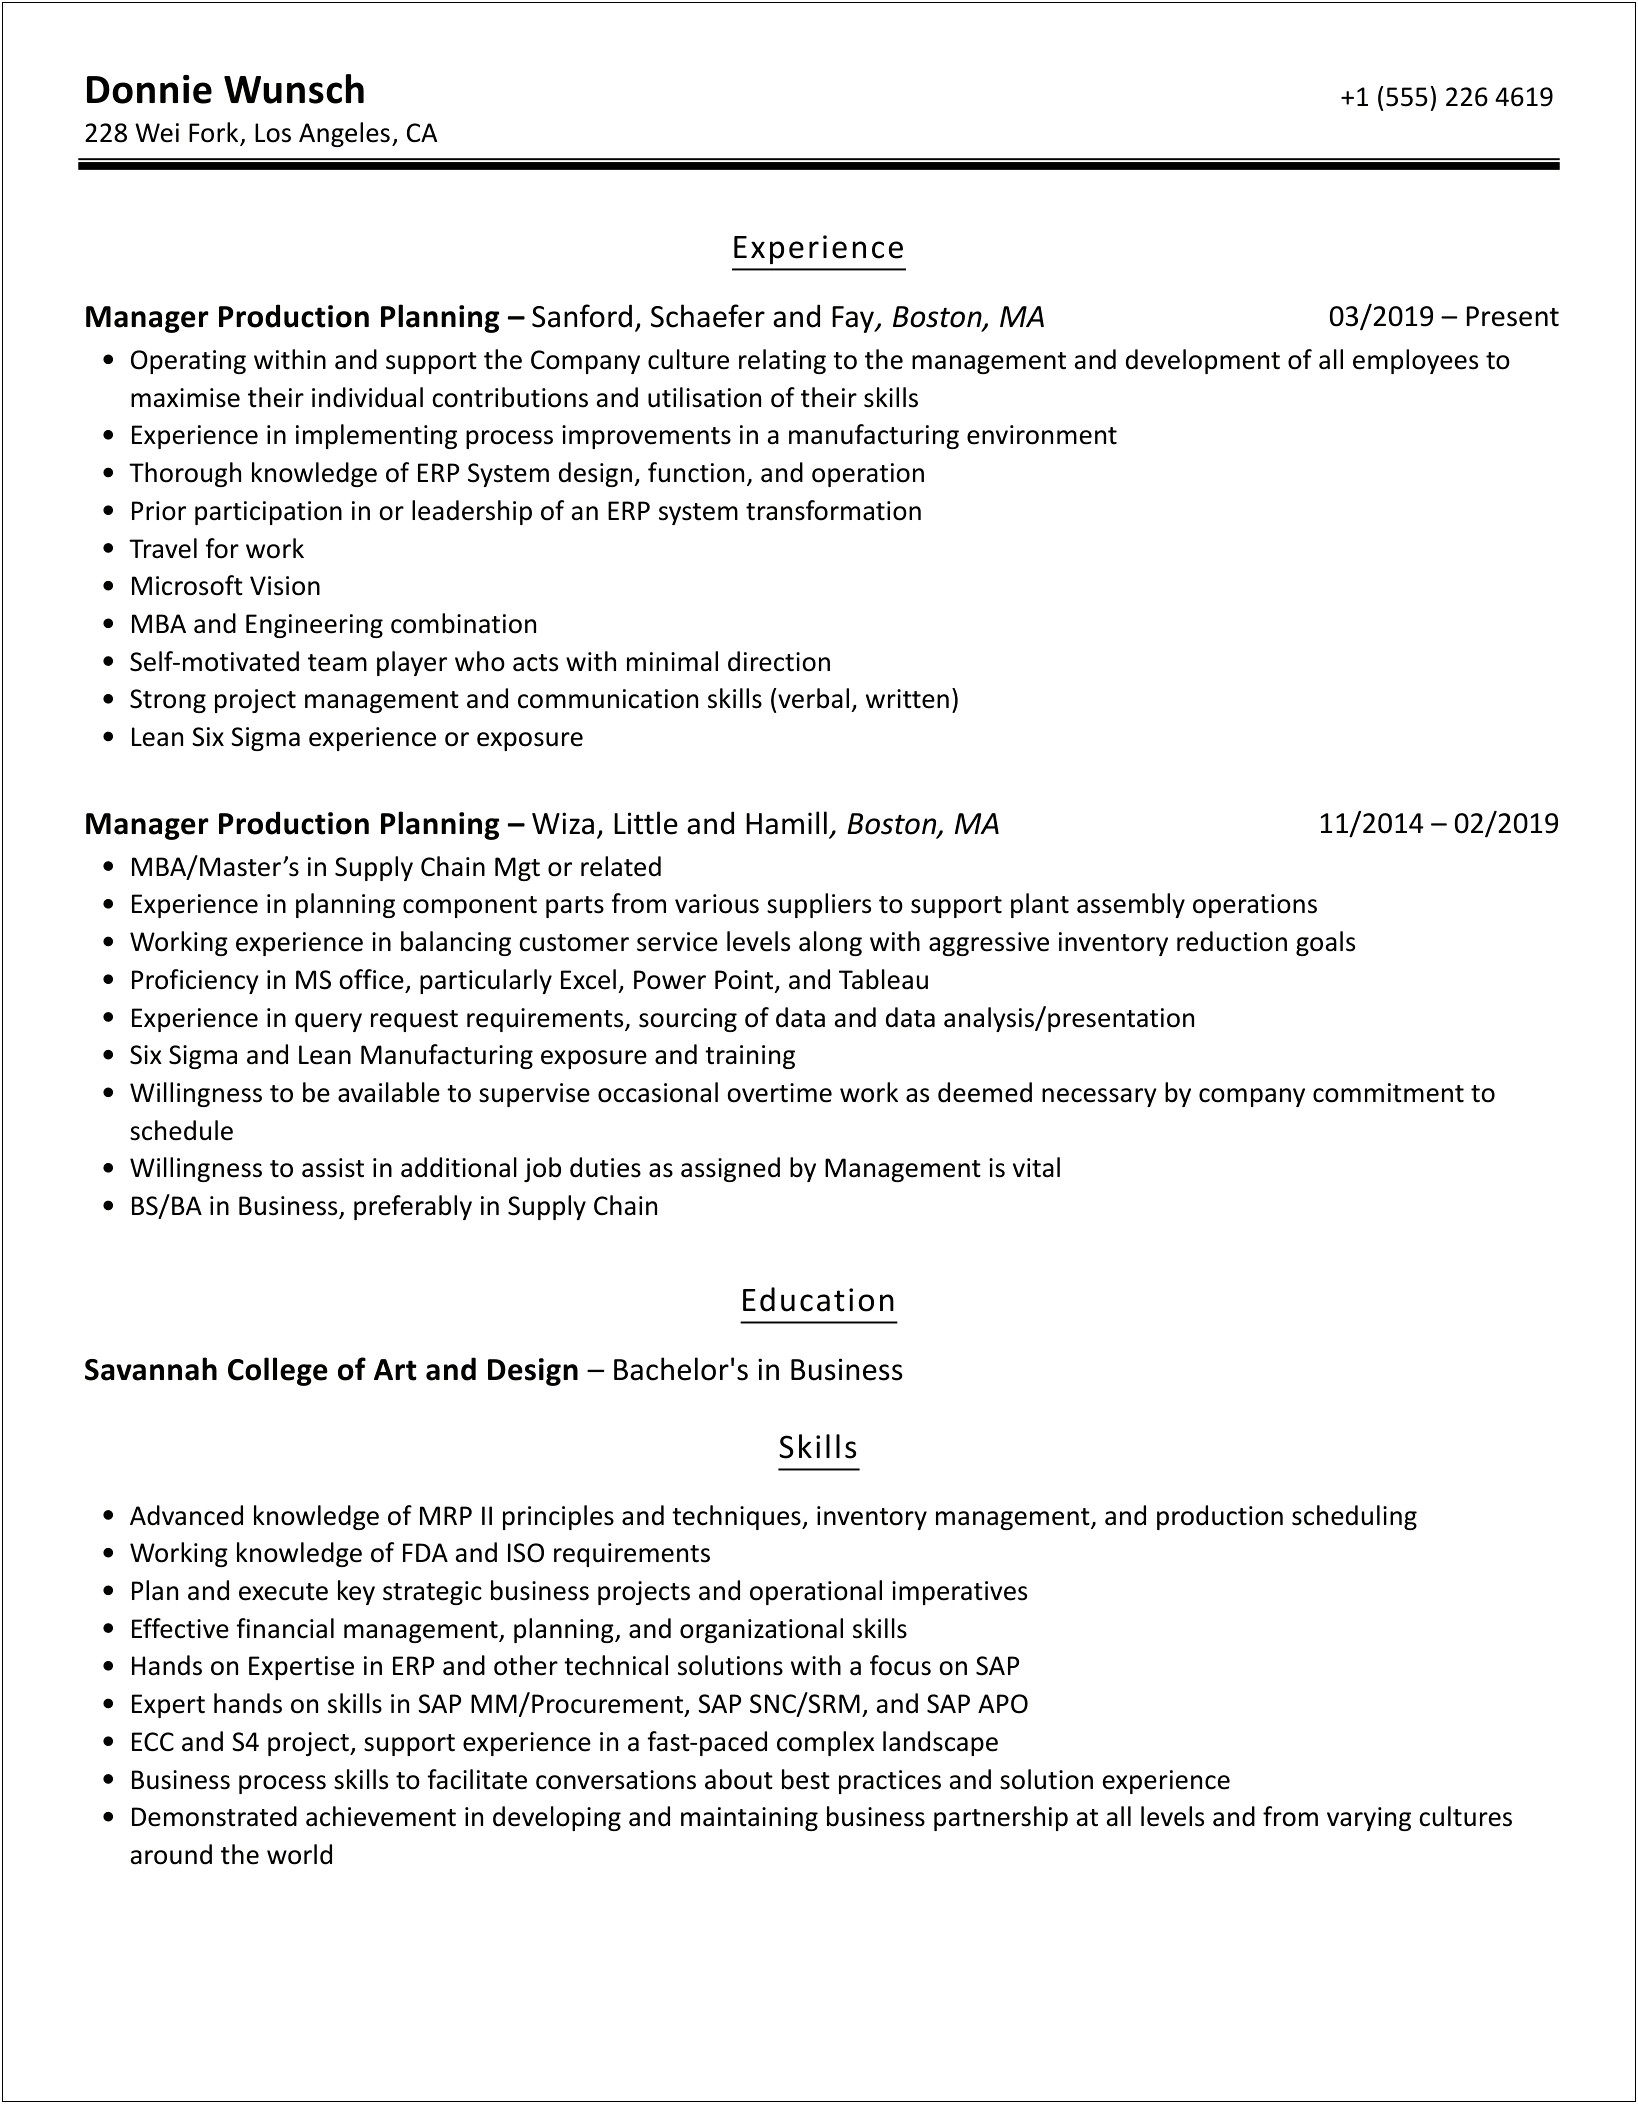 Production Planning And Control Manager Resume Samples